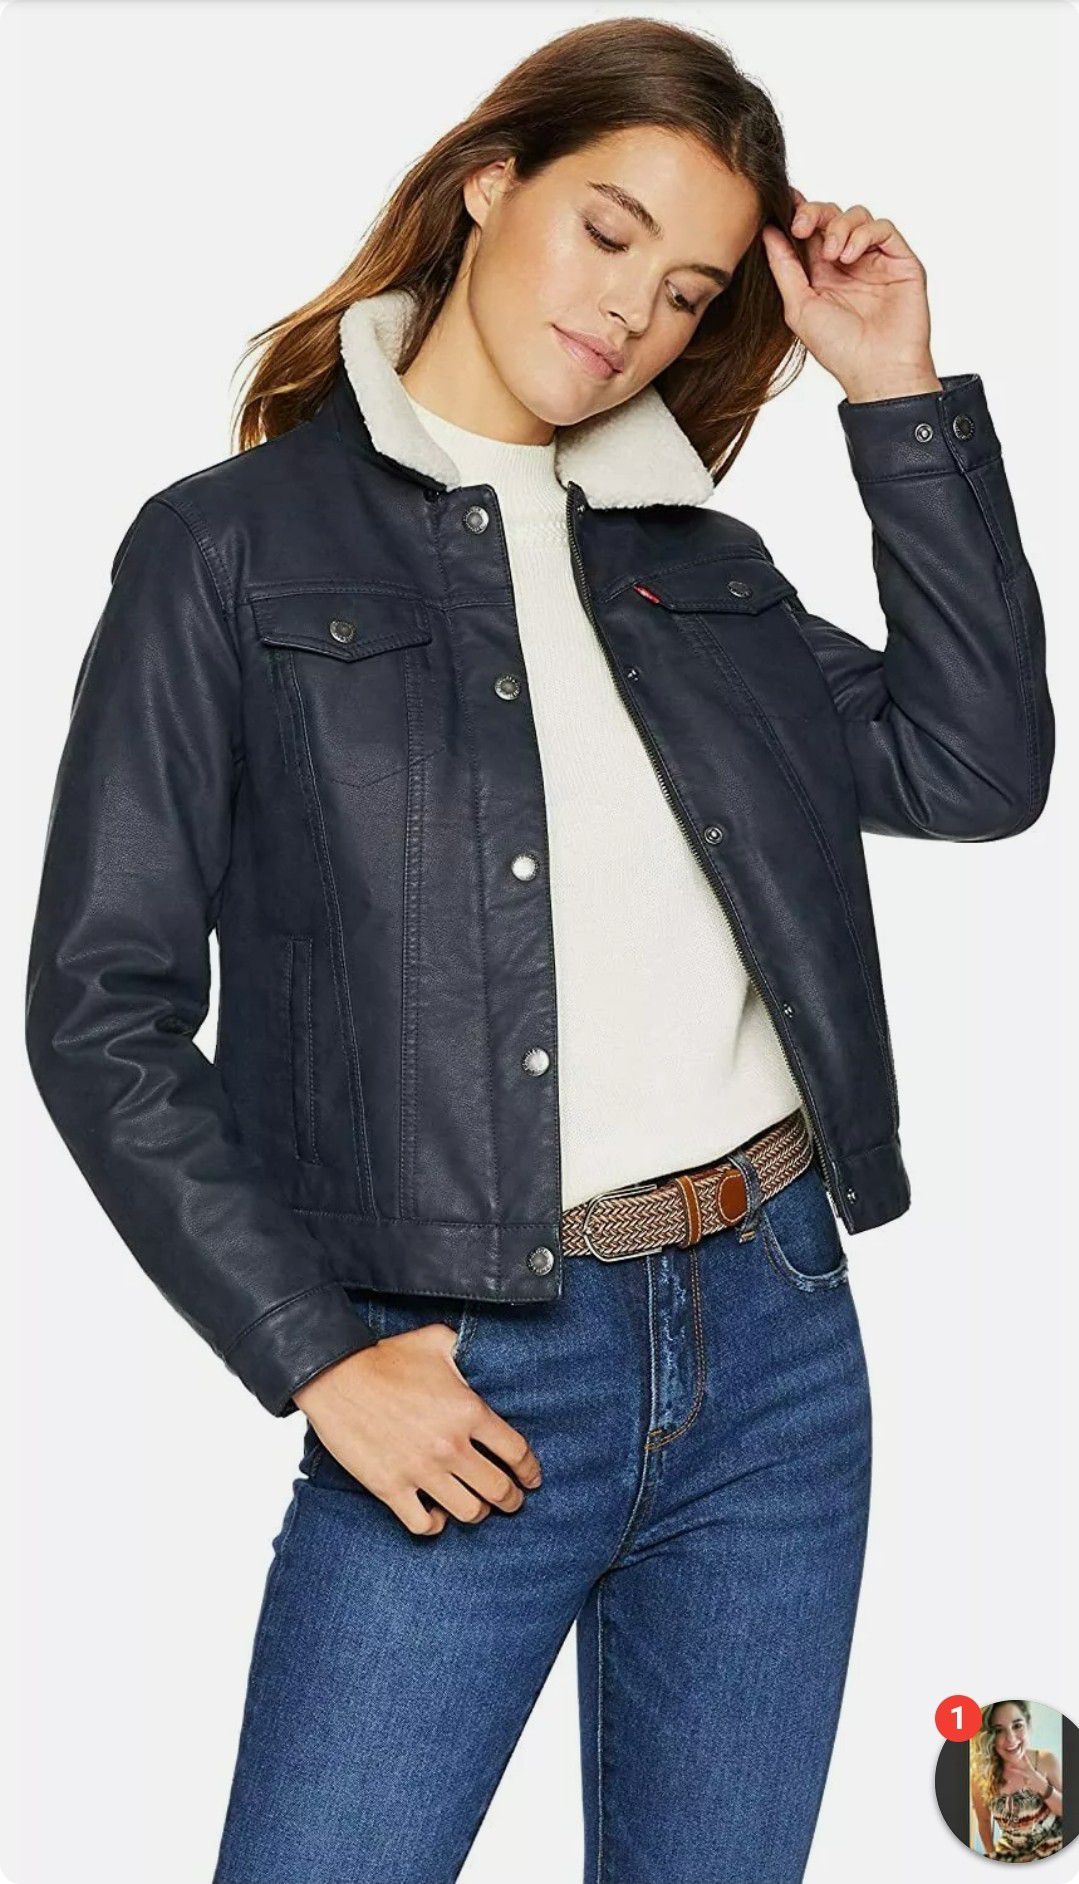 Levi's Classic Sherpa Lined Faux Leather Trucker Jacket - Women's Size  Medium. Condition is New with tags. Style Code: LW8JU777 NVY for Sale in  Denver, CO - OfferUp